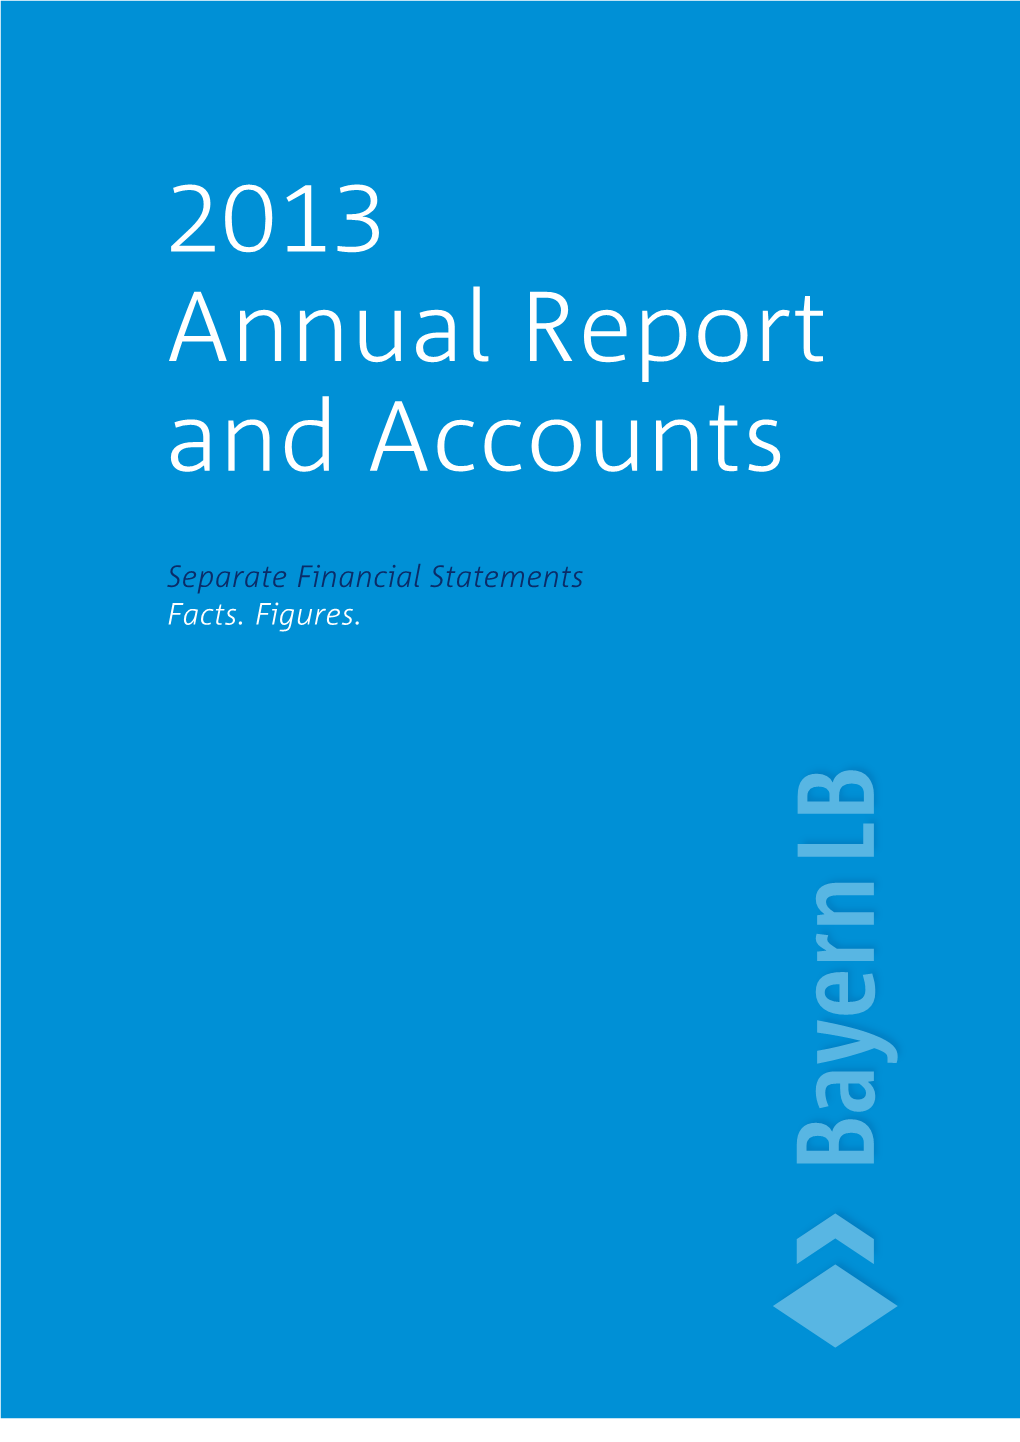 2013 Annual Report and Accounts